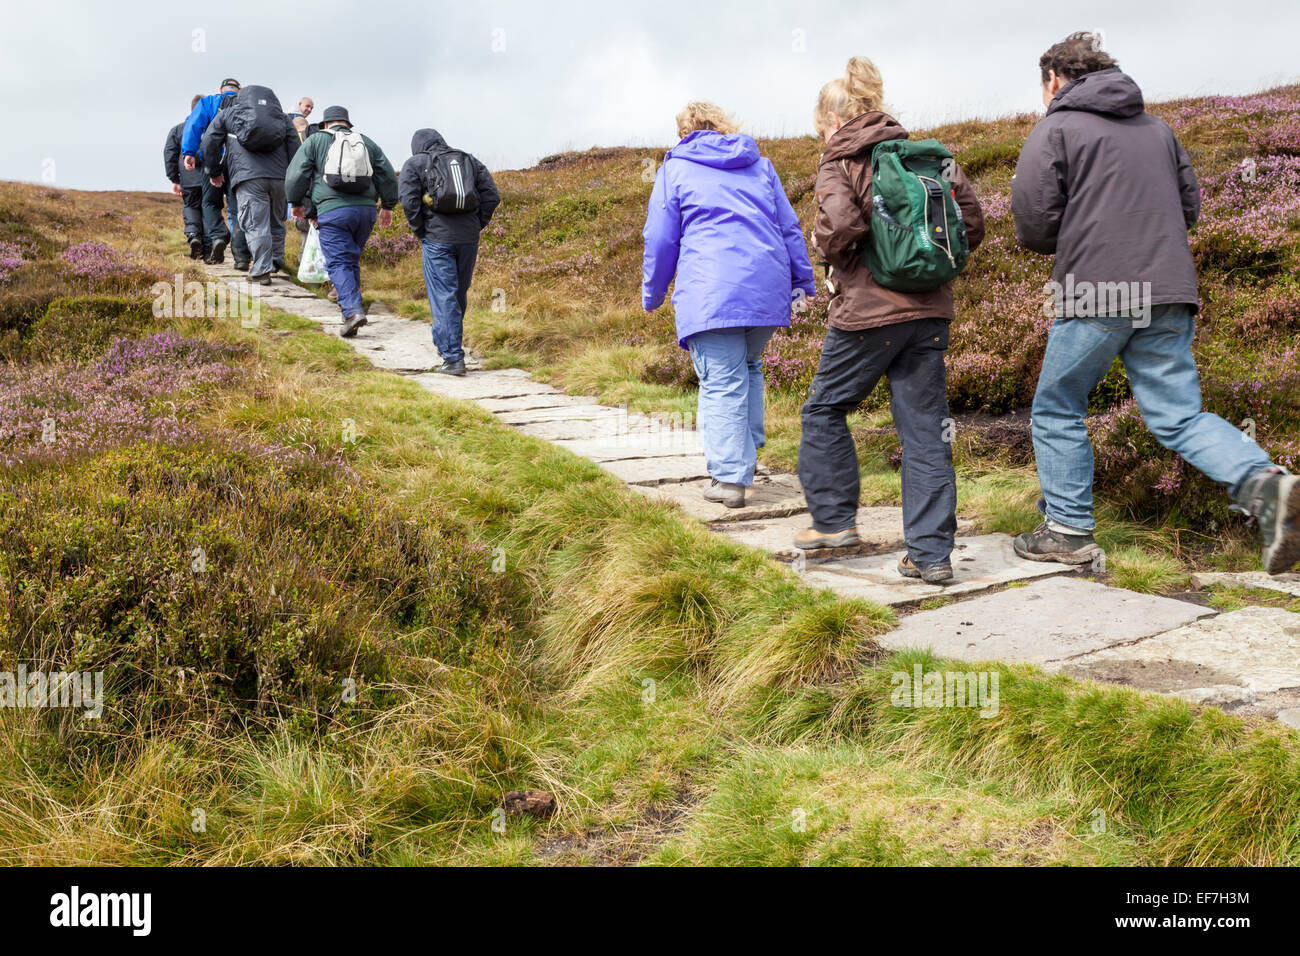 A stone flag path across moorland to help control erosion of moors by hiking. Kinder Scout, Peak District National Park, Derbyshire, England, UK Stock Photo